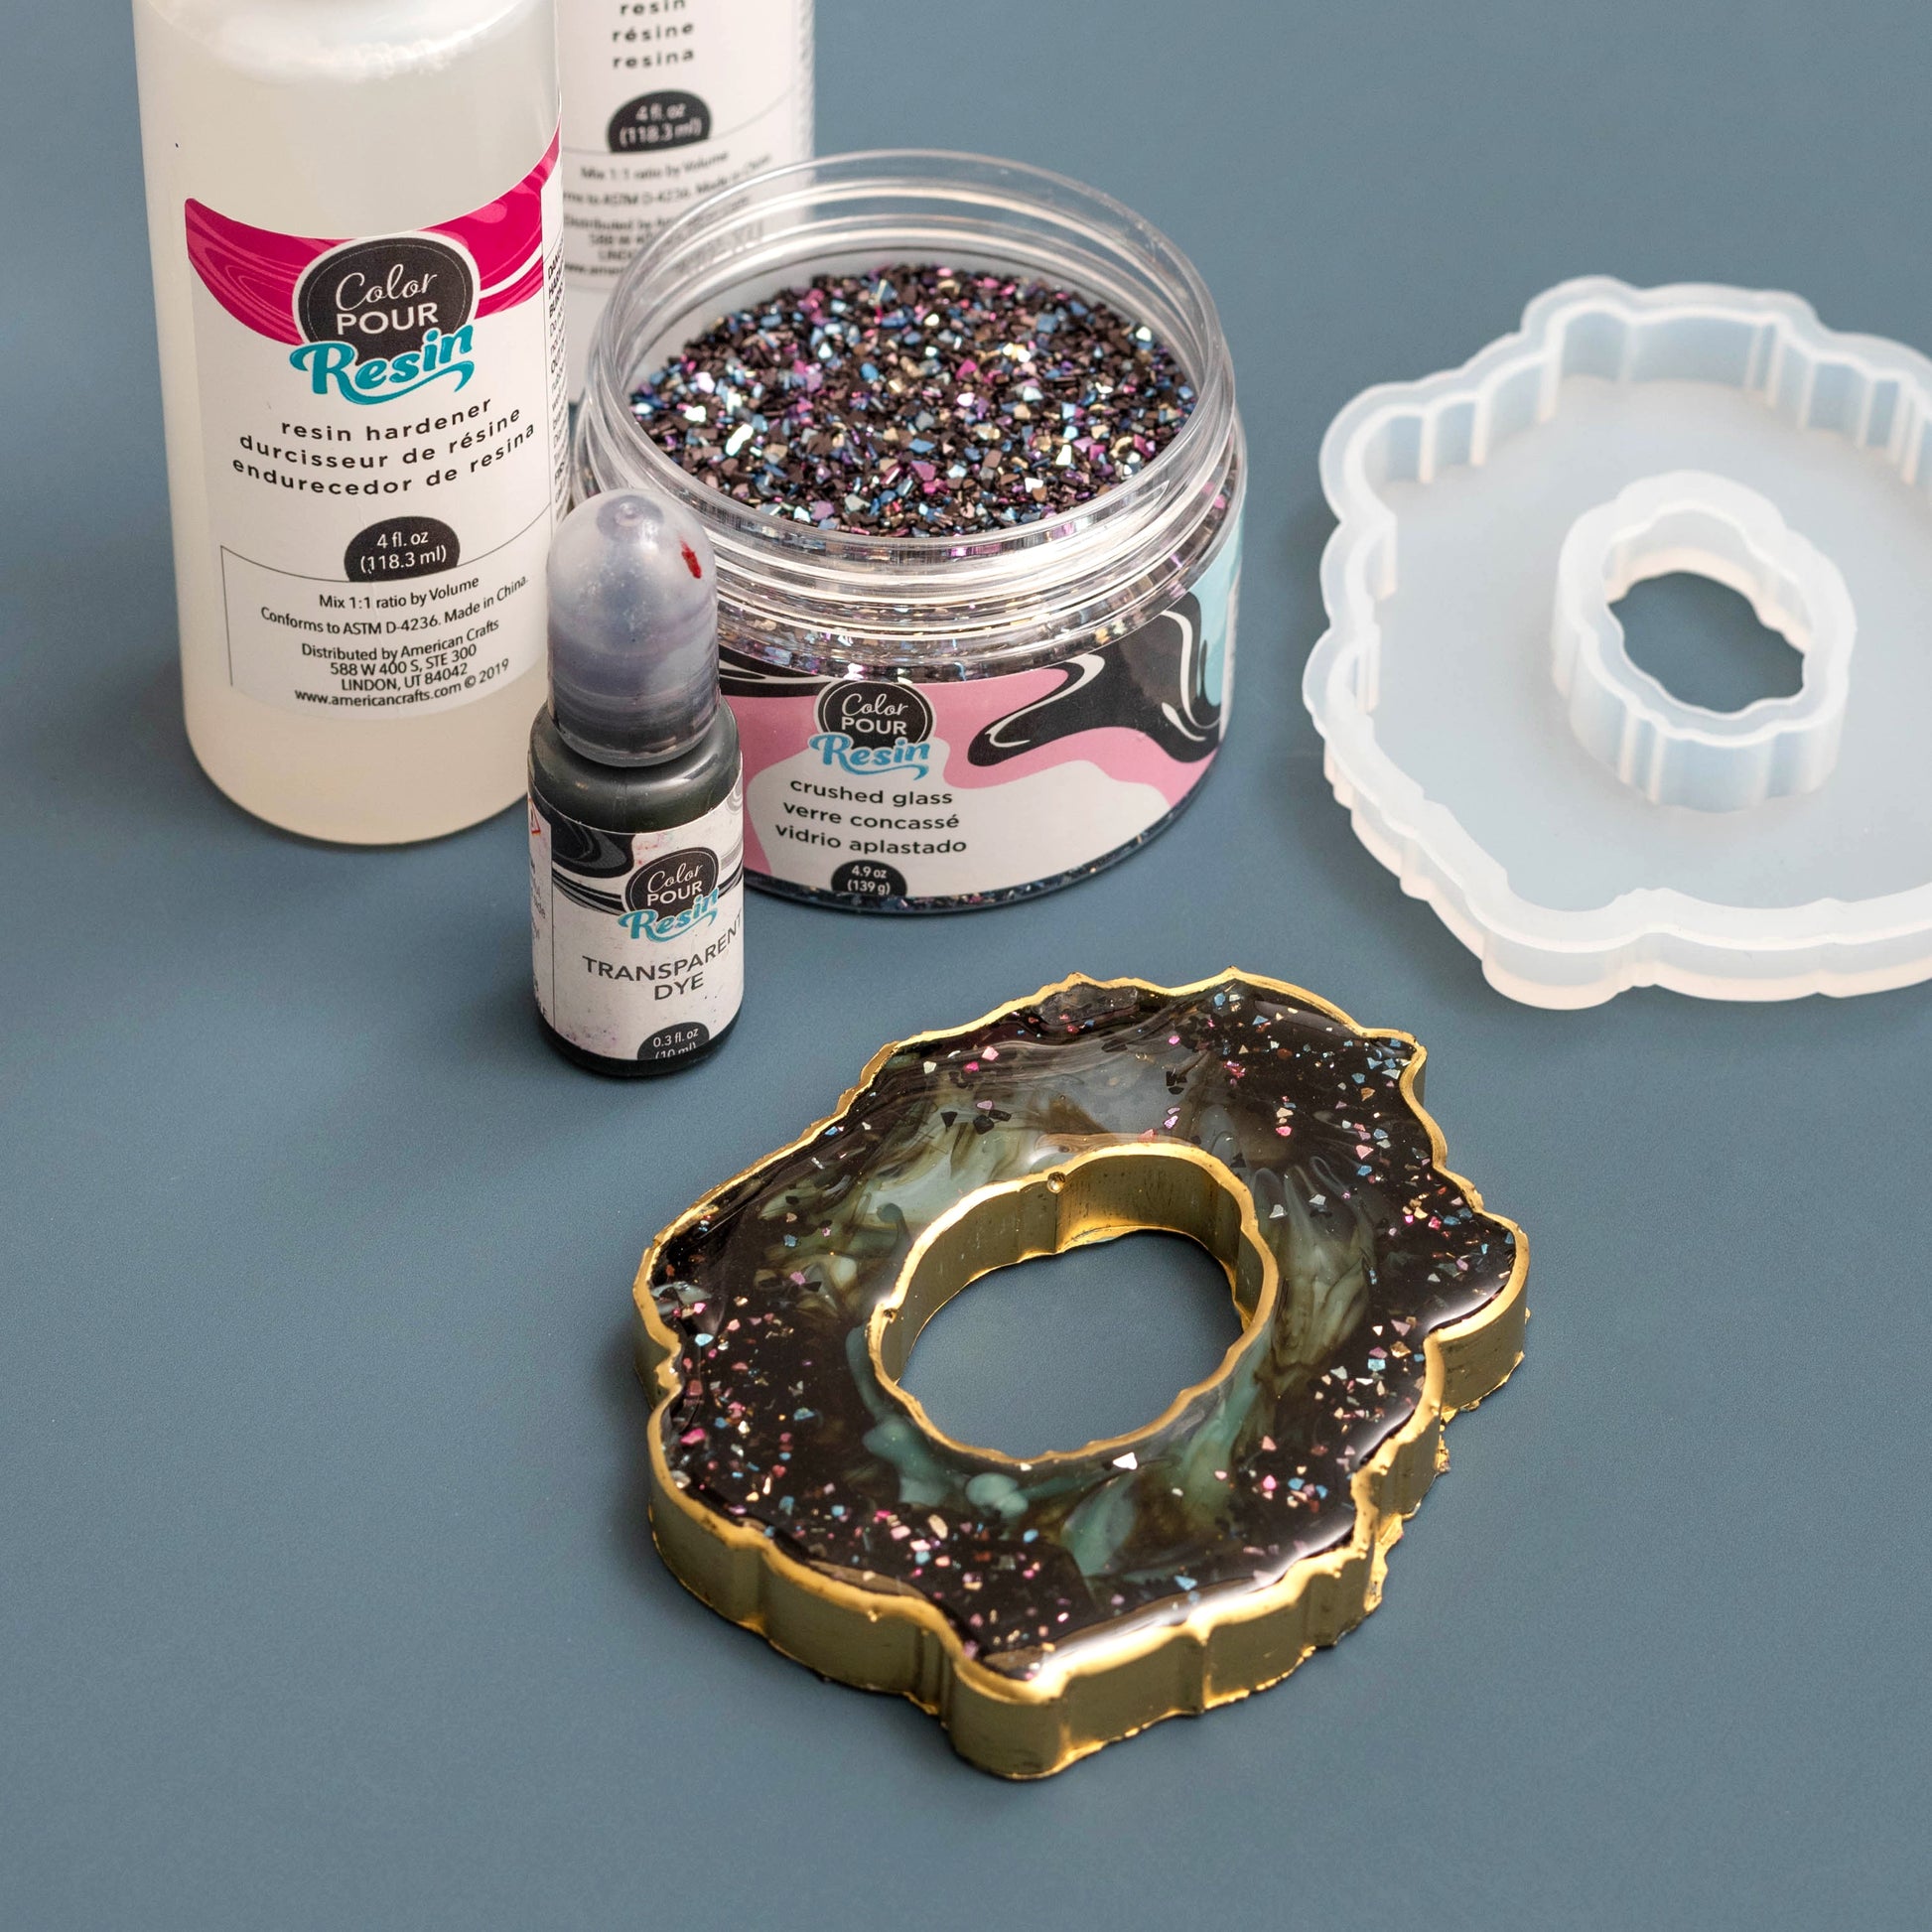 American Crafts™ Color Pour Resin Circle, Square & Hexagon Coaster